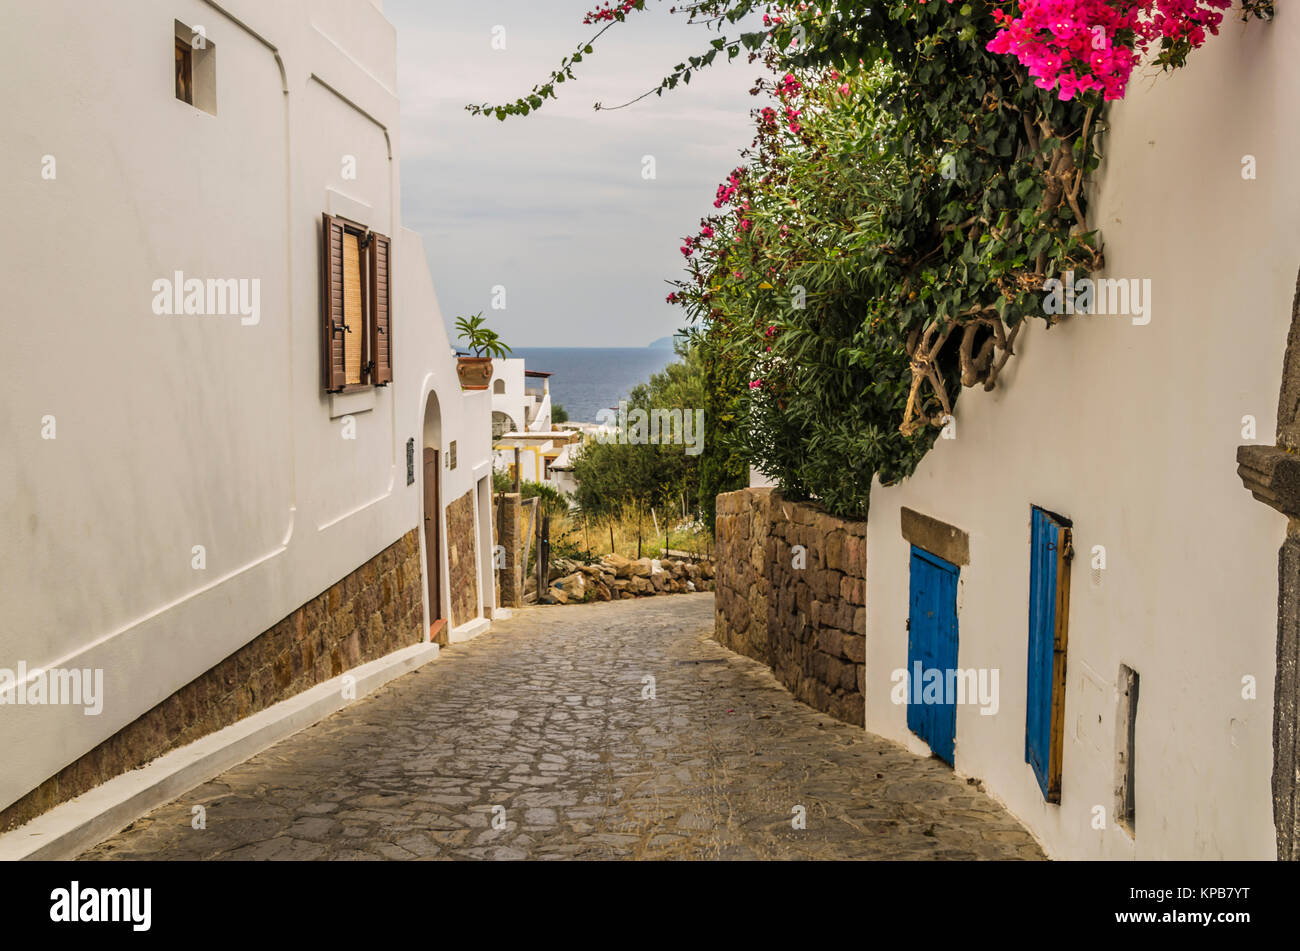 street of stones and white houses with colorful flowers and the sea tyrrhenian background panarea one of the Aeolian Islands Stock Photo